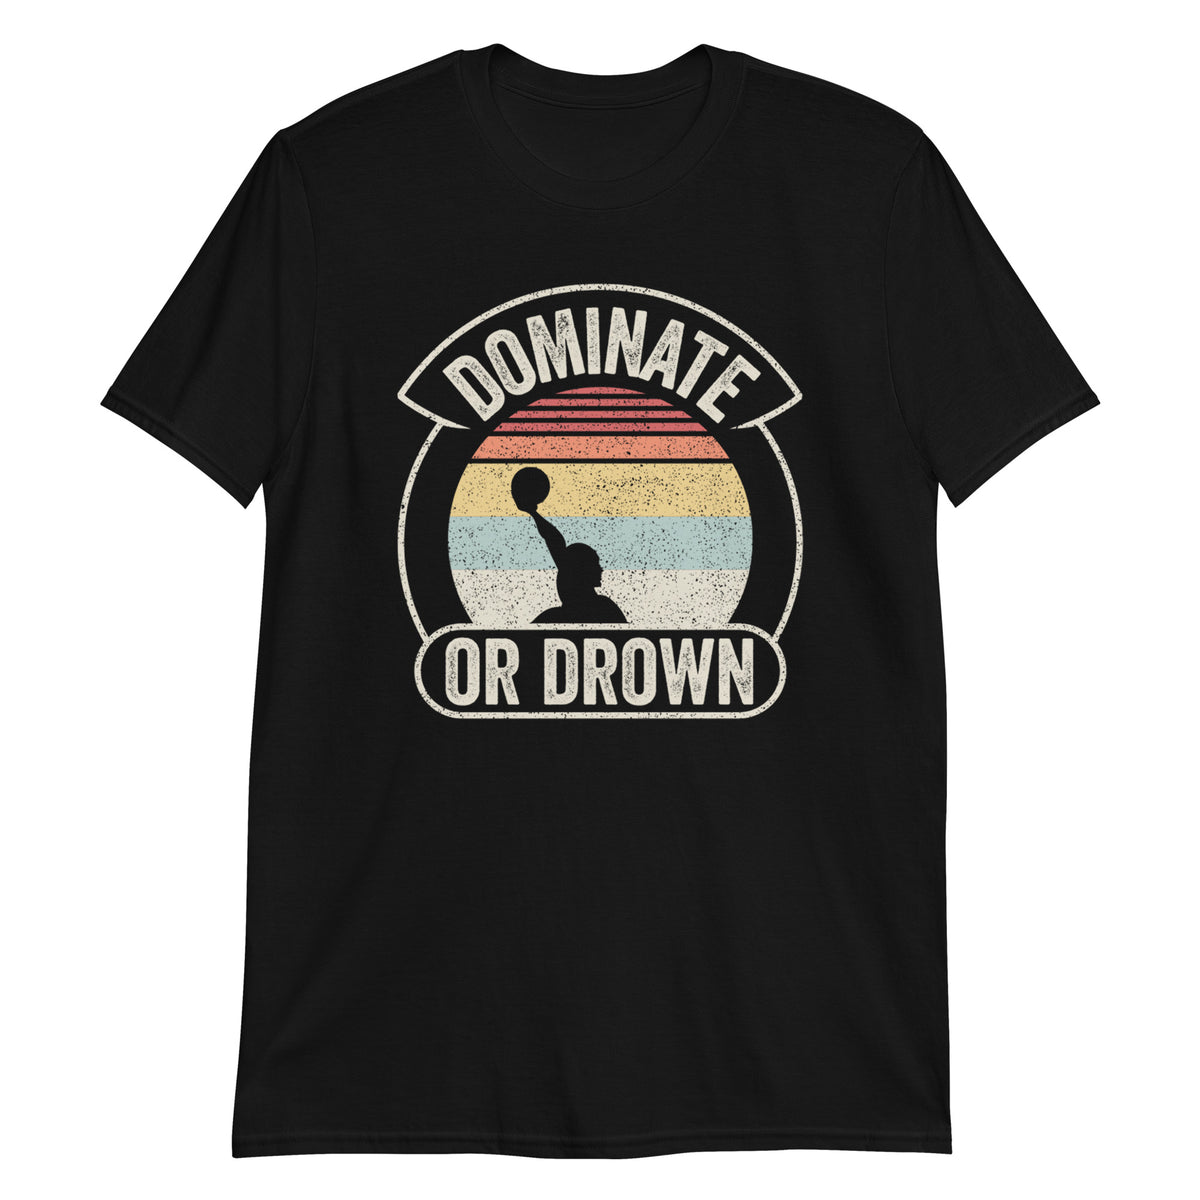 Dominate or Drown T-Shirt